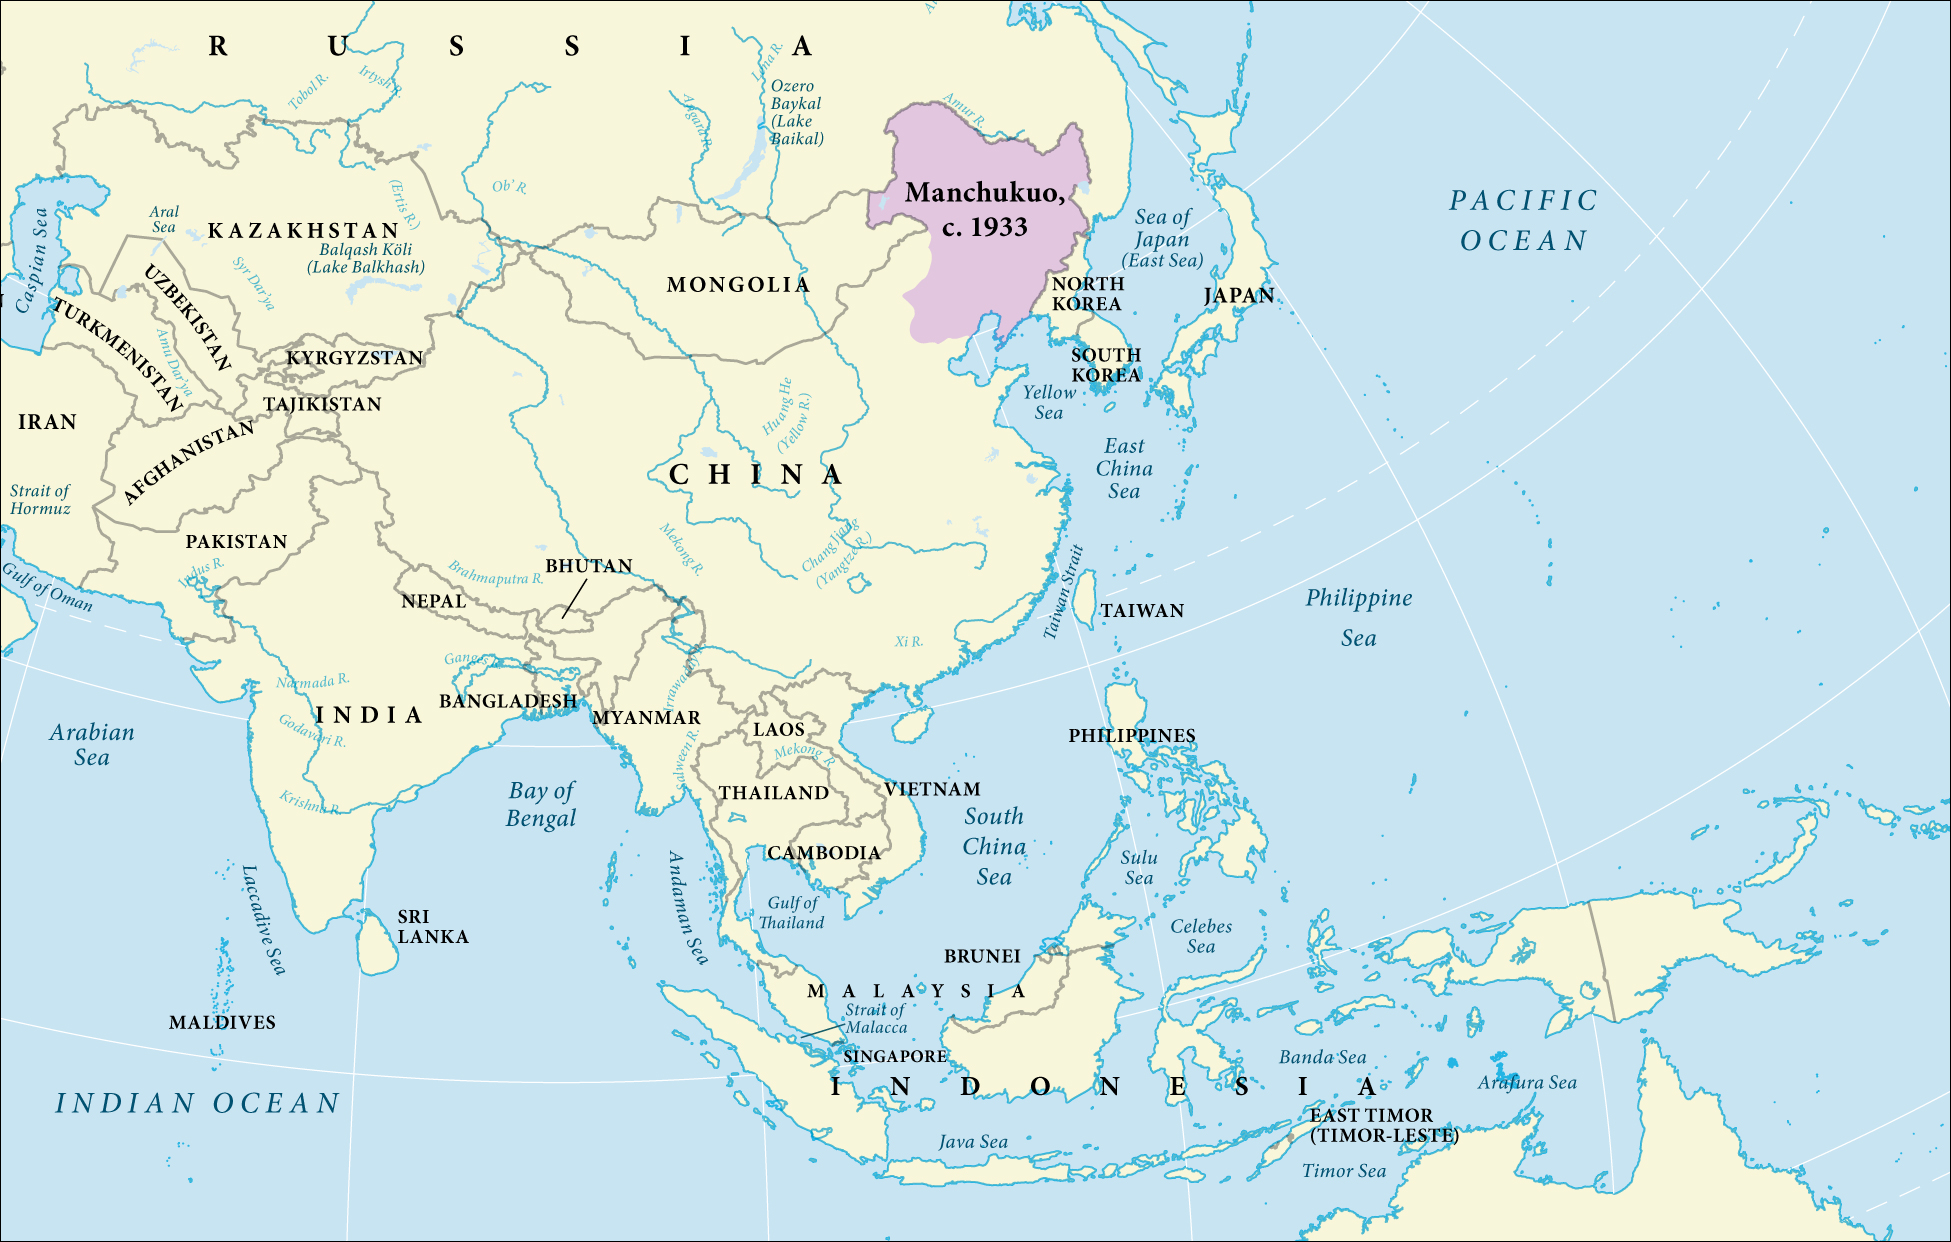 This map shows Asia and the Pacific region. Manchukuo is highlighted and borders Russia, Mongolia, China, and North Korea.